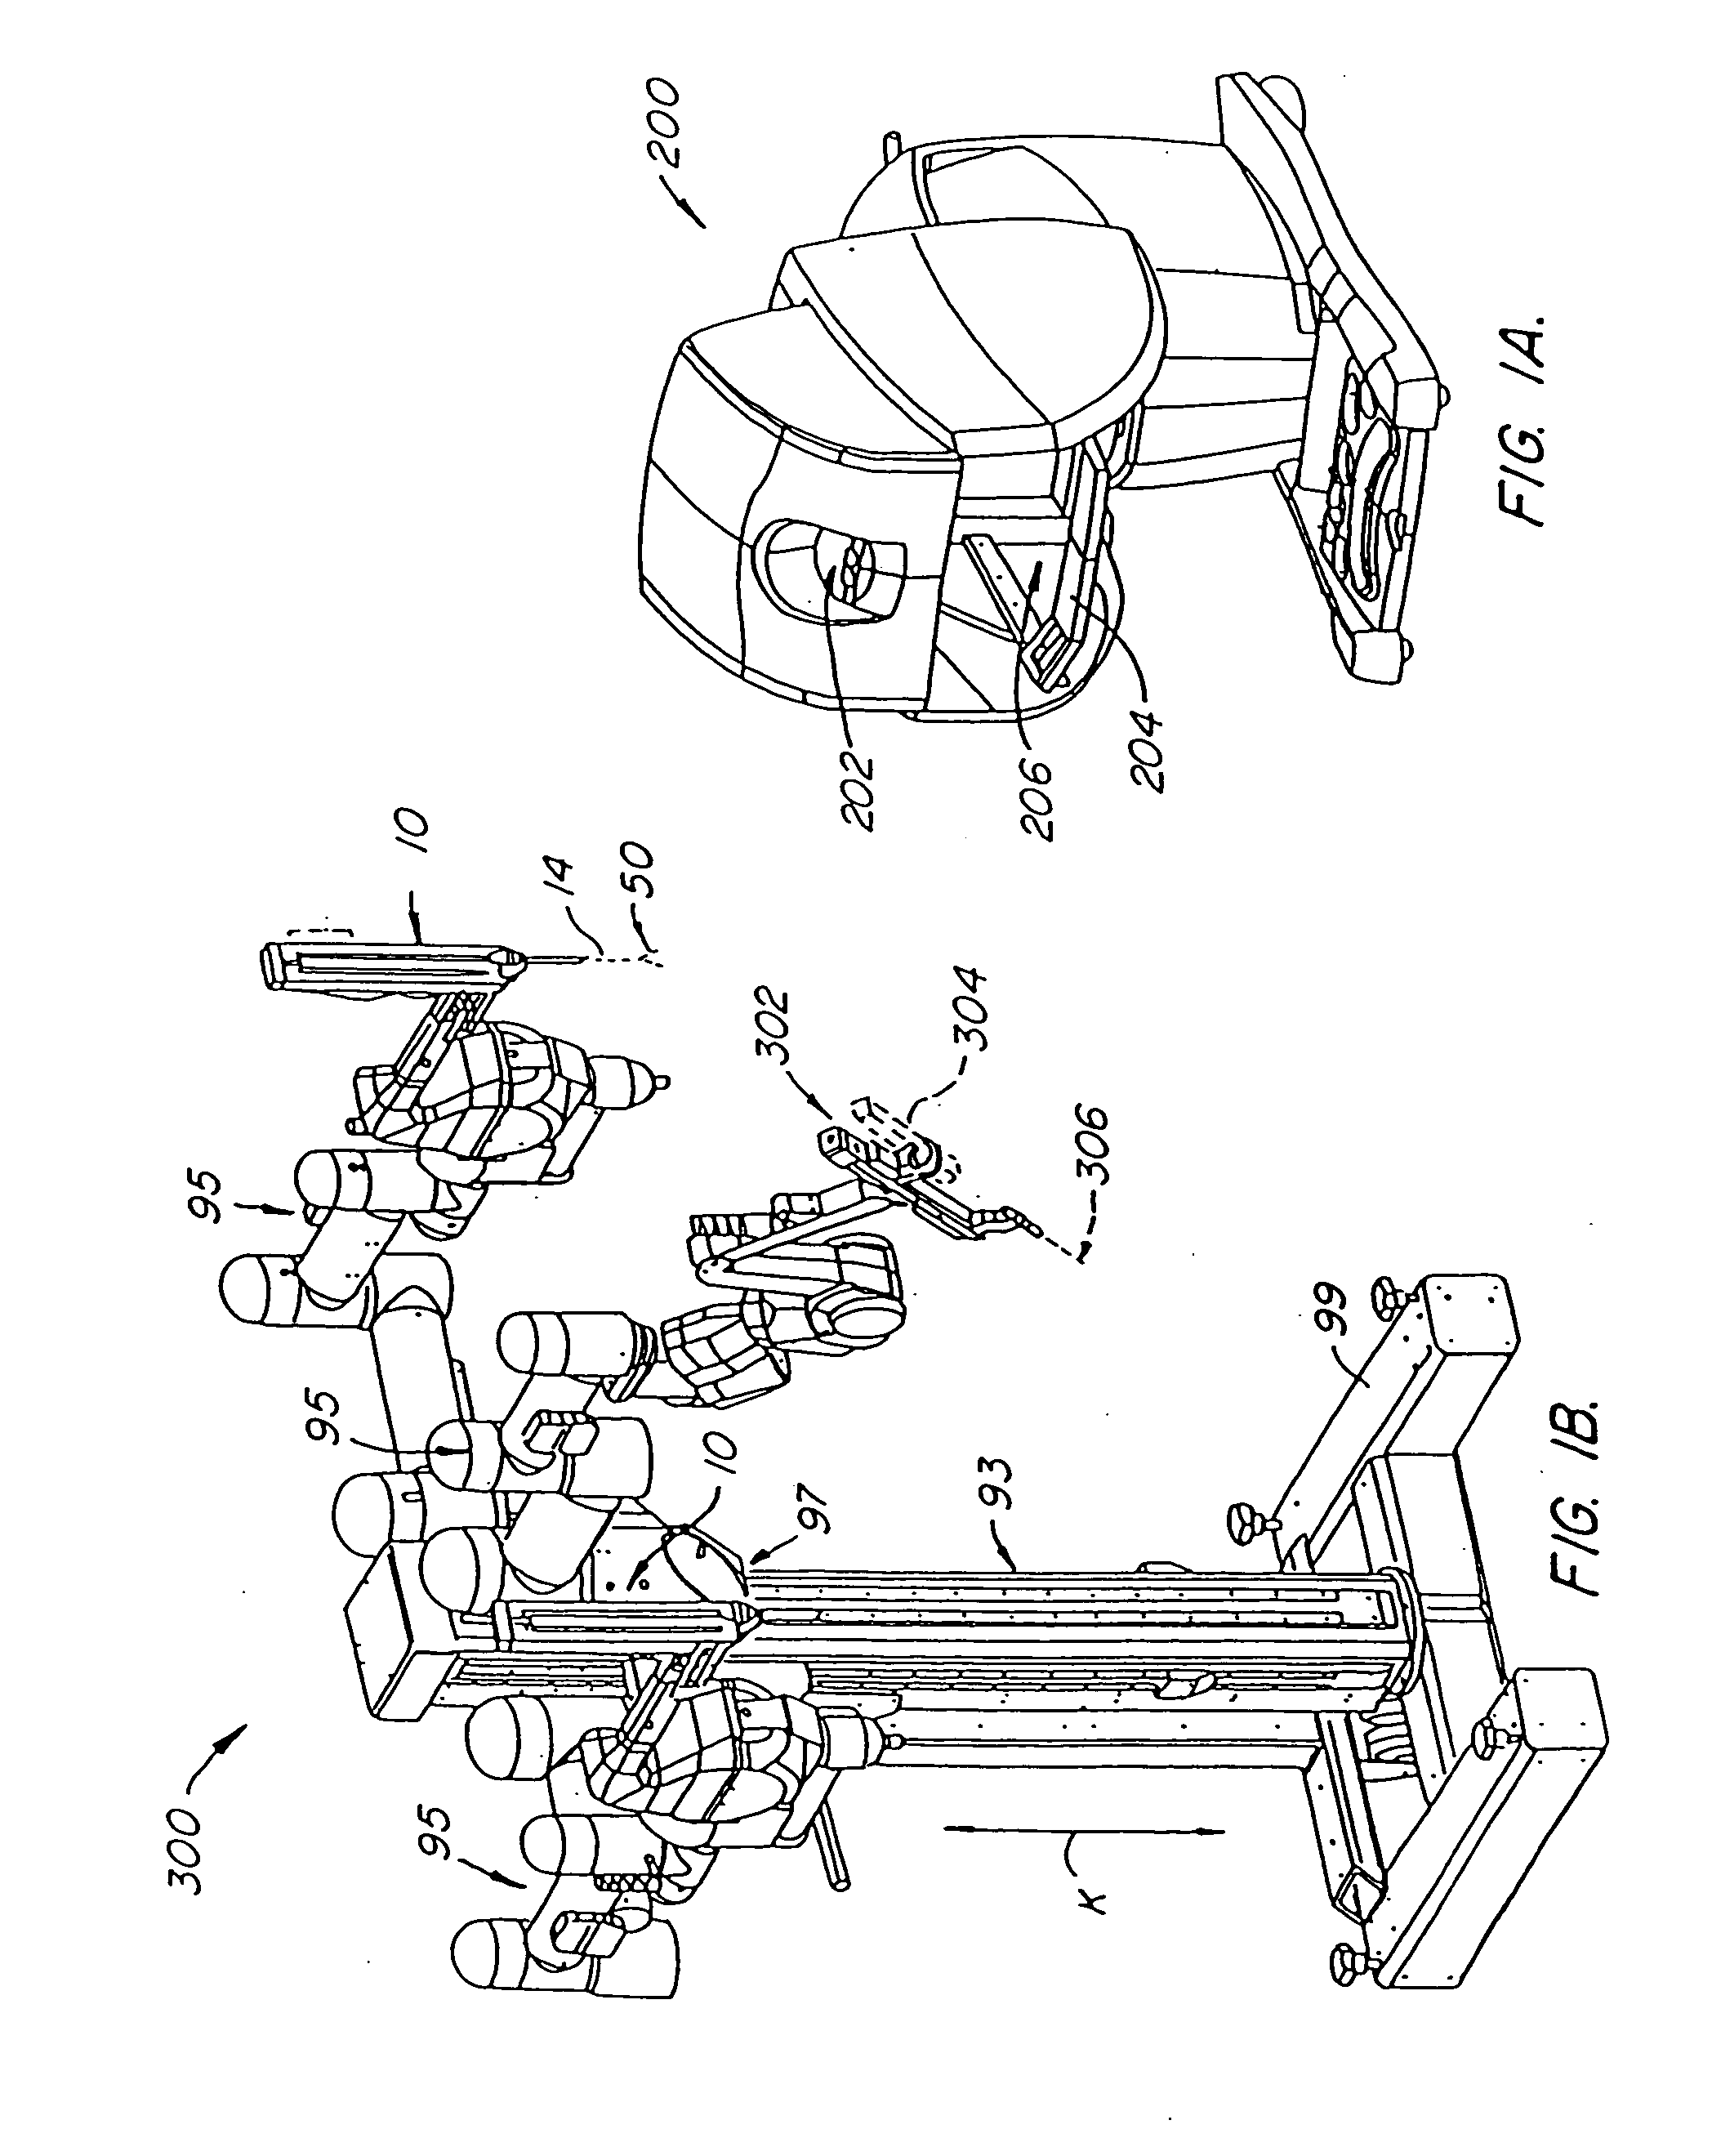 Aspects of a control system of a minimally invasive surgical apparatus